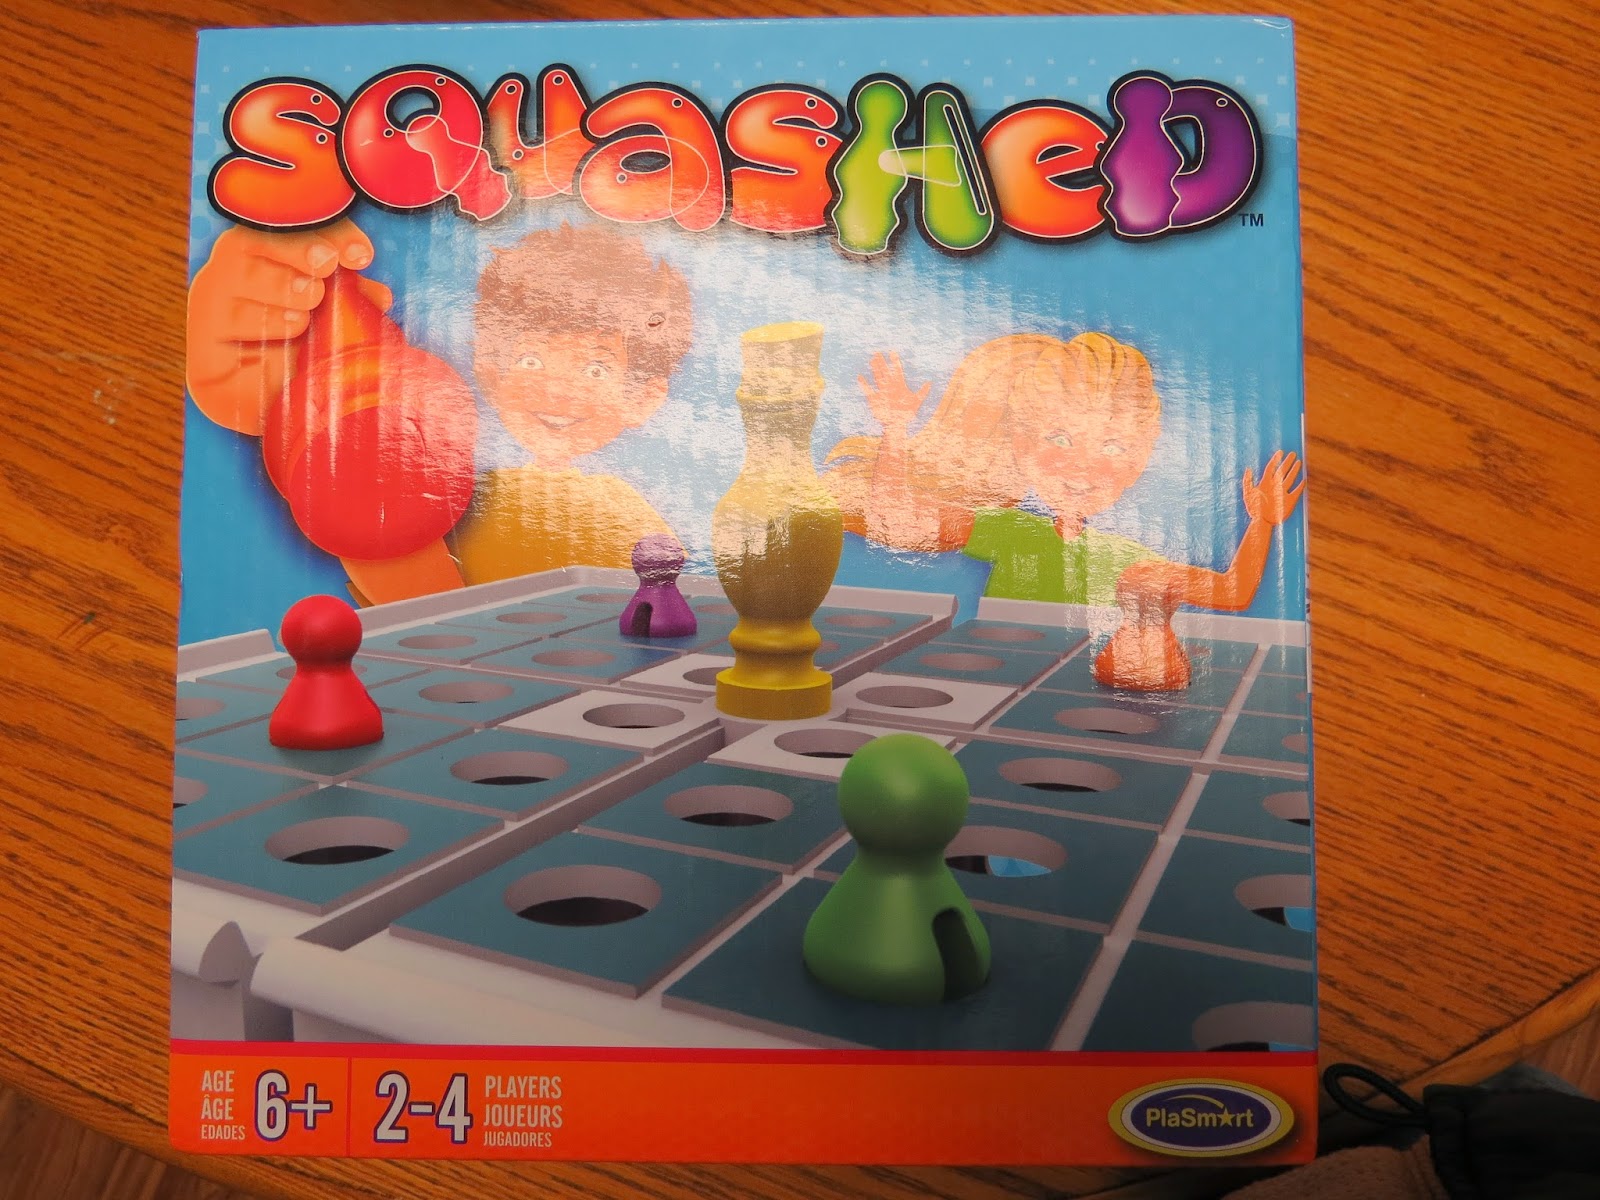 http://dealsandfree.blogspot.ca/2014/11/gift-guide-have-fun-playing-squashed.html